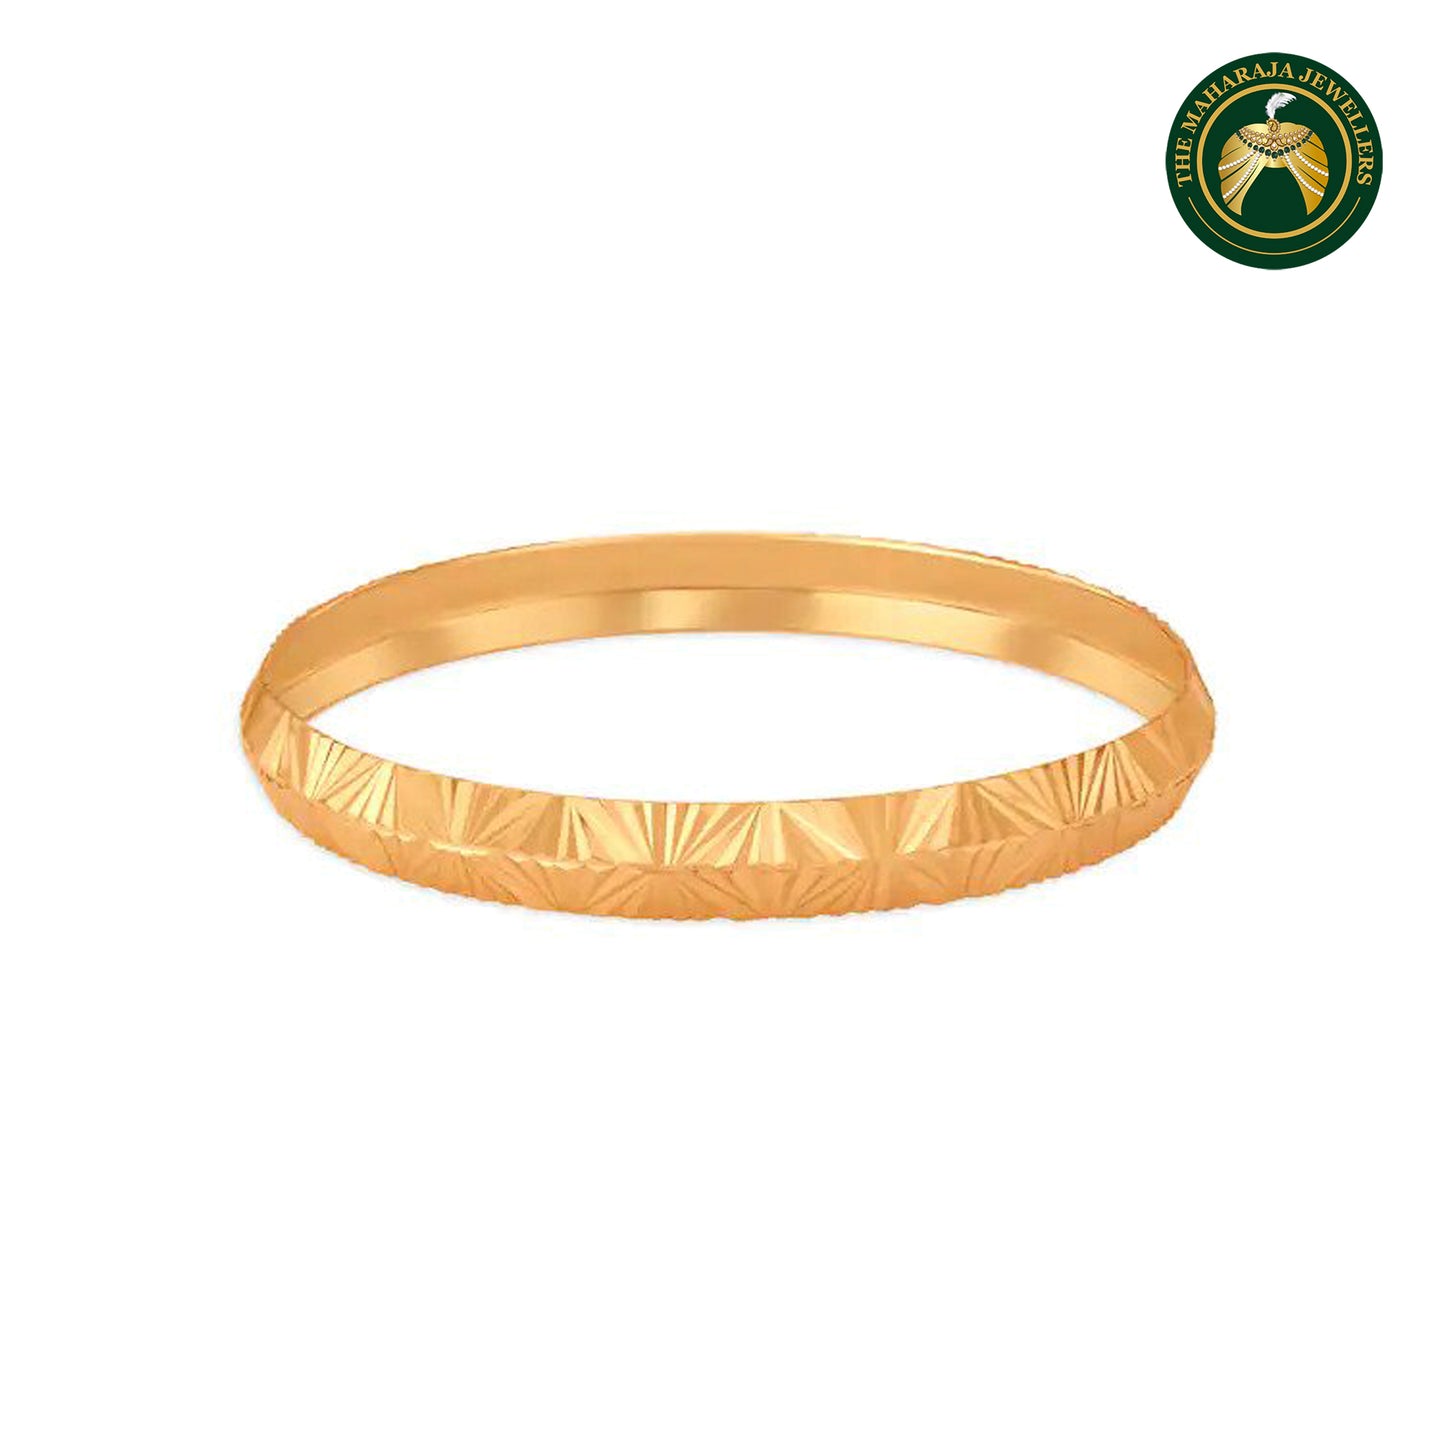 Images for 465532. BRACELET in 22 K two-tone gold Aufinja, 28.05 g. -  Auctionet